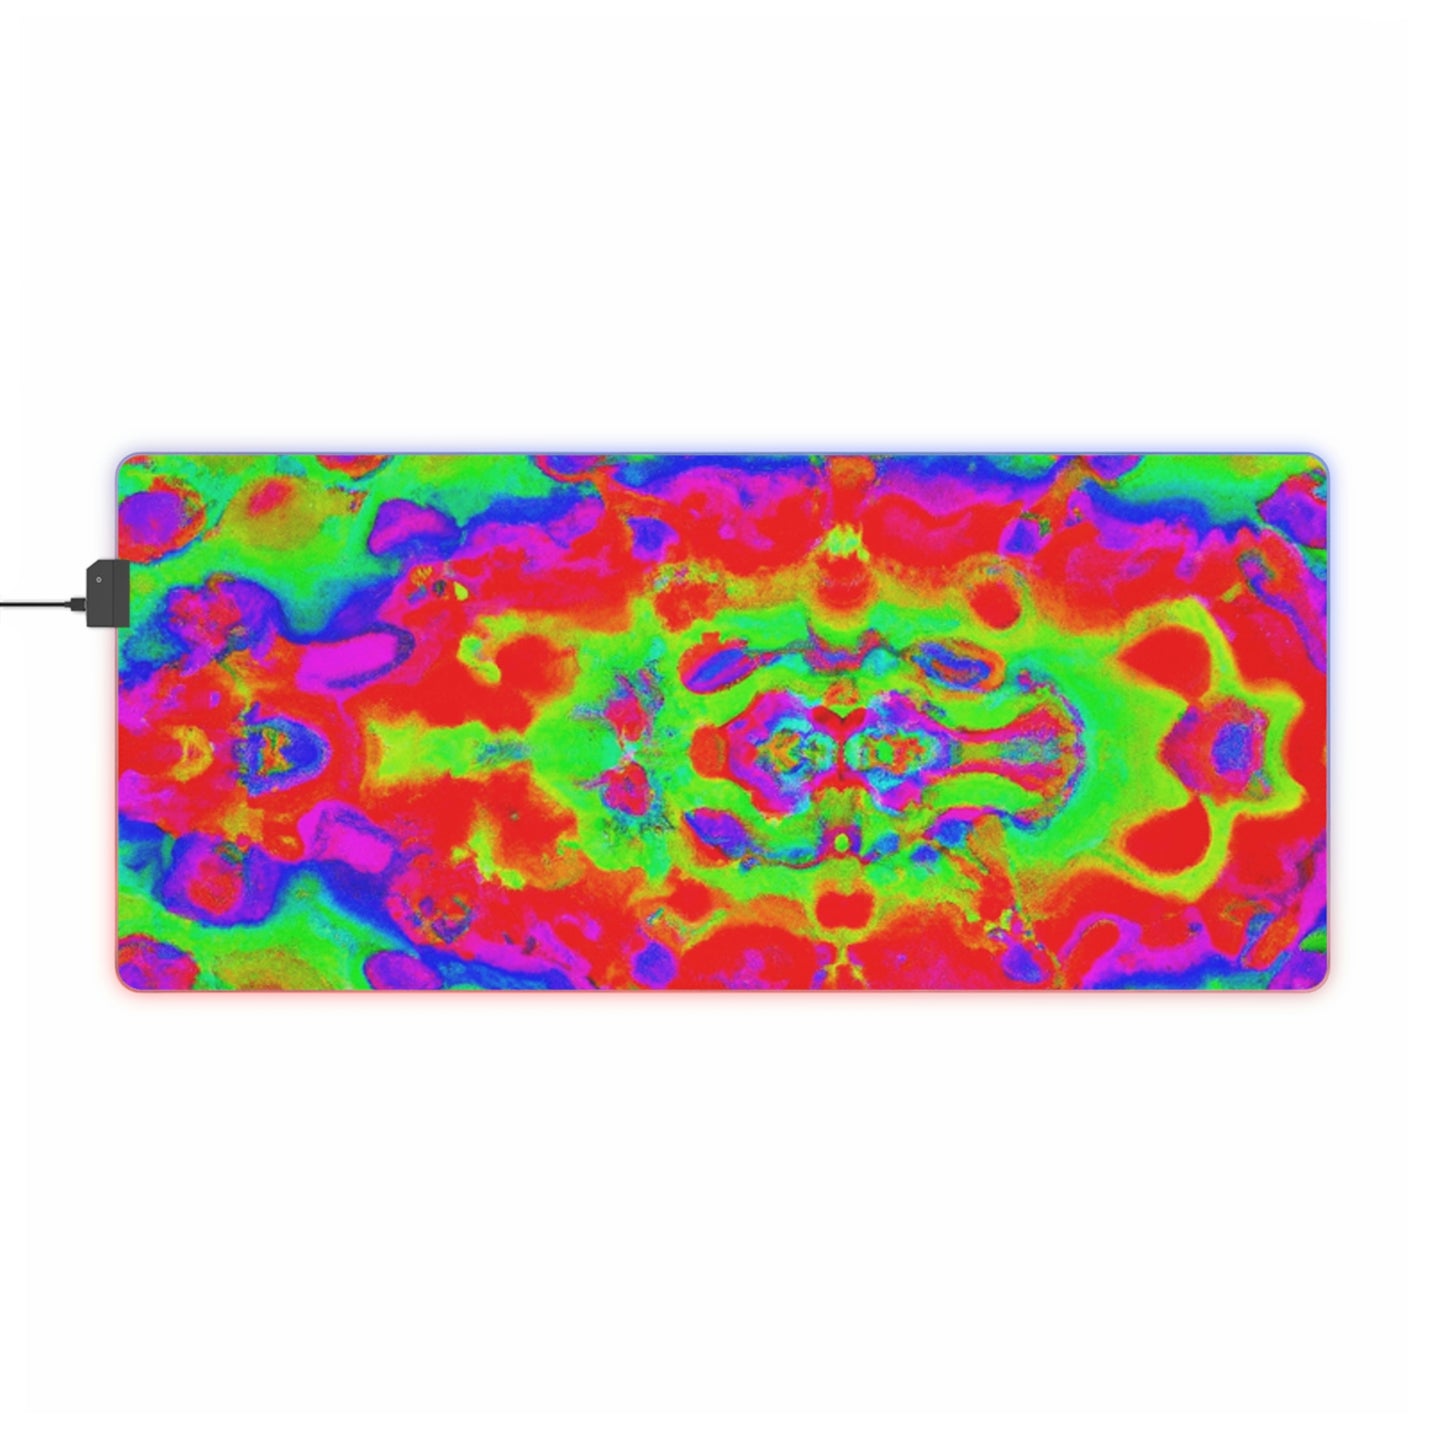 Sgt. Rocket Sullivan - Psychedelic Trippy LED Light Up Gaming Mouse Pad